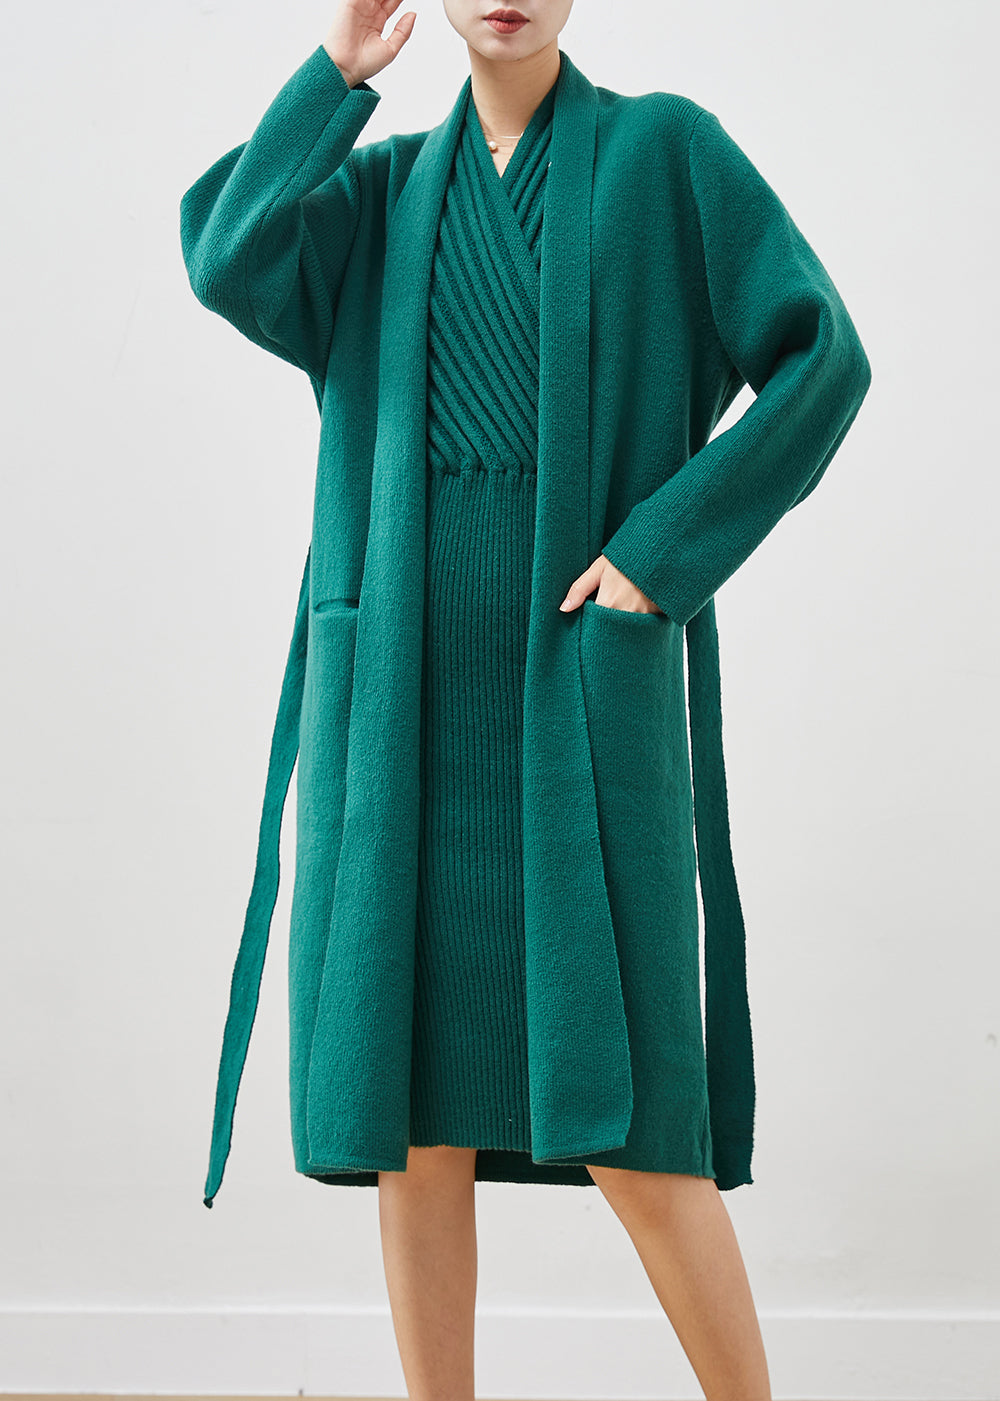 Women Blackish Green V Neck Thick Knit Women Sets 2 Pieces Winter